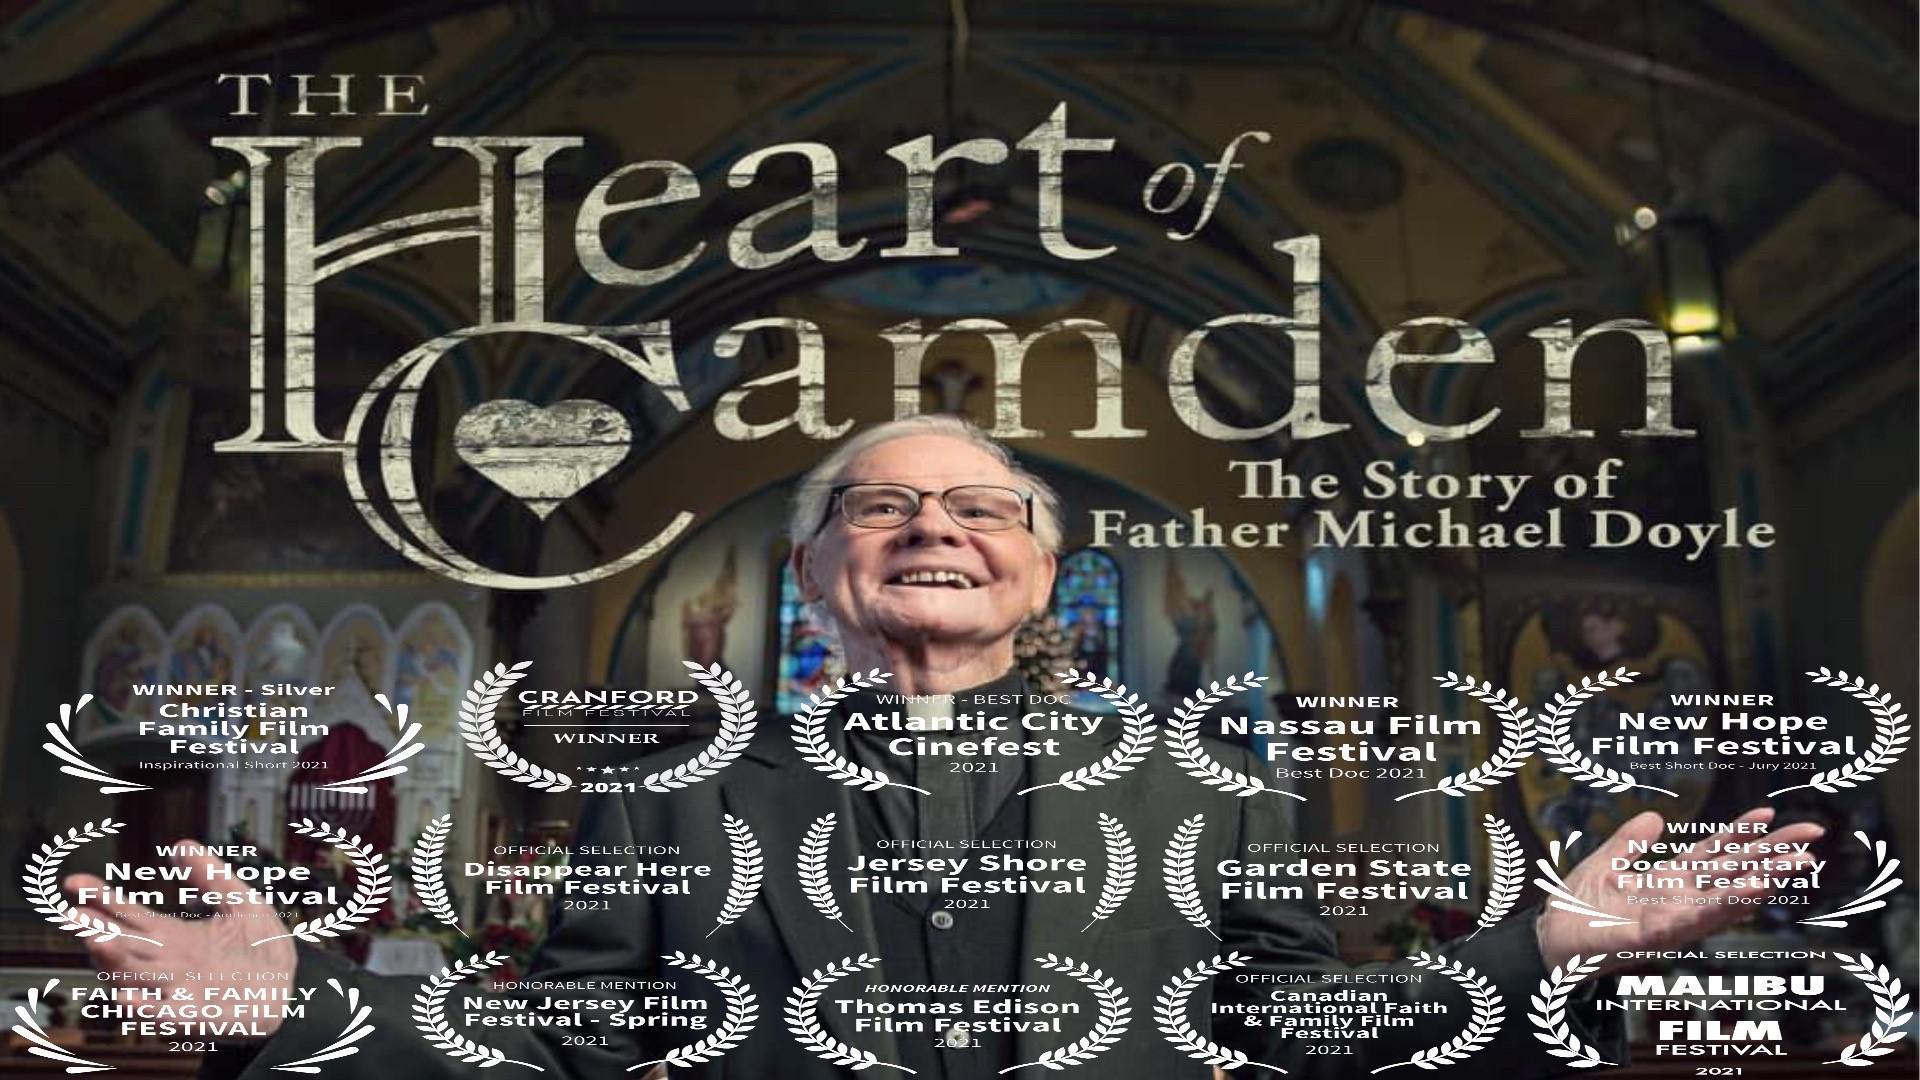 The Heart of Camden - The Story of Father Michael Doyle